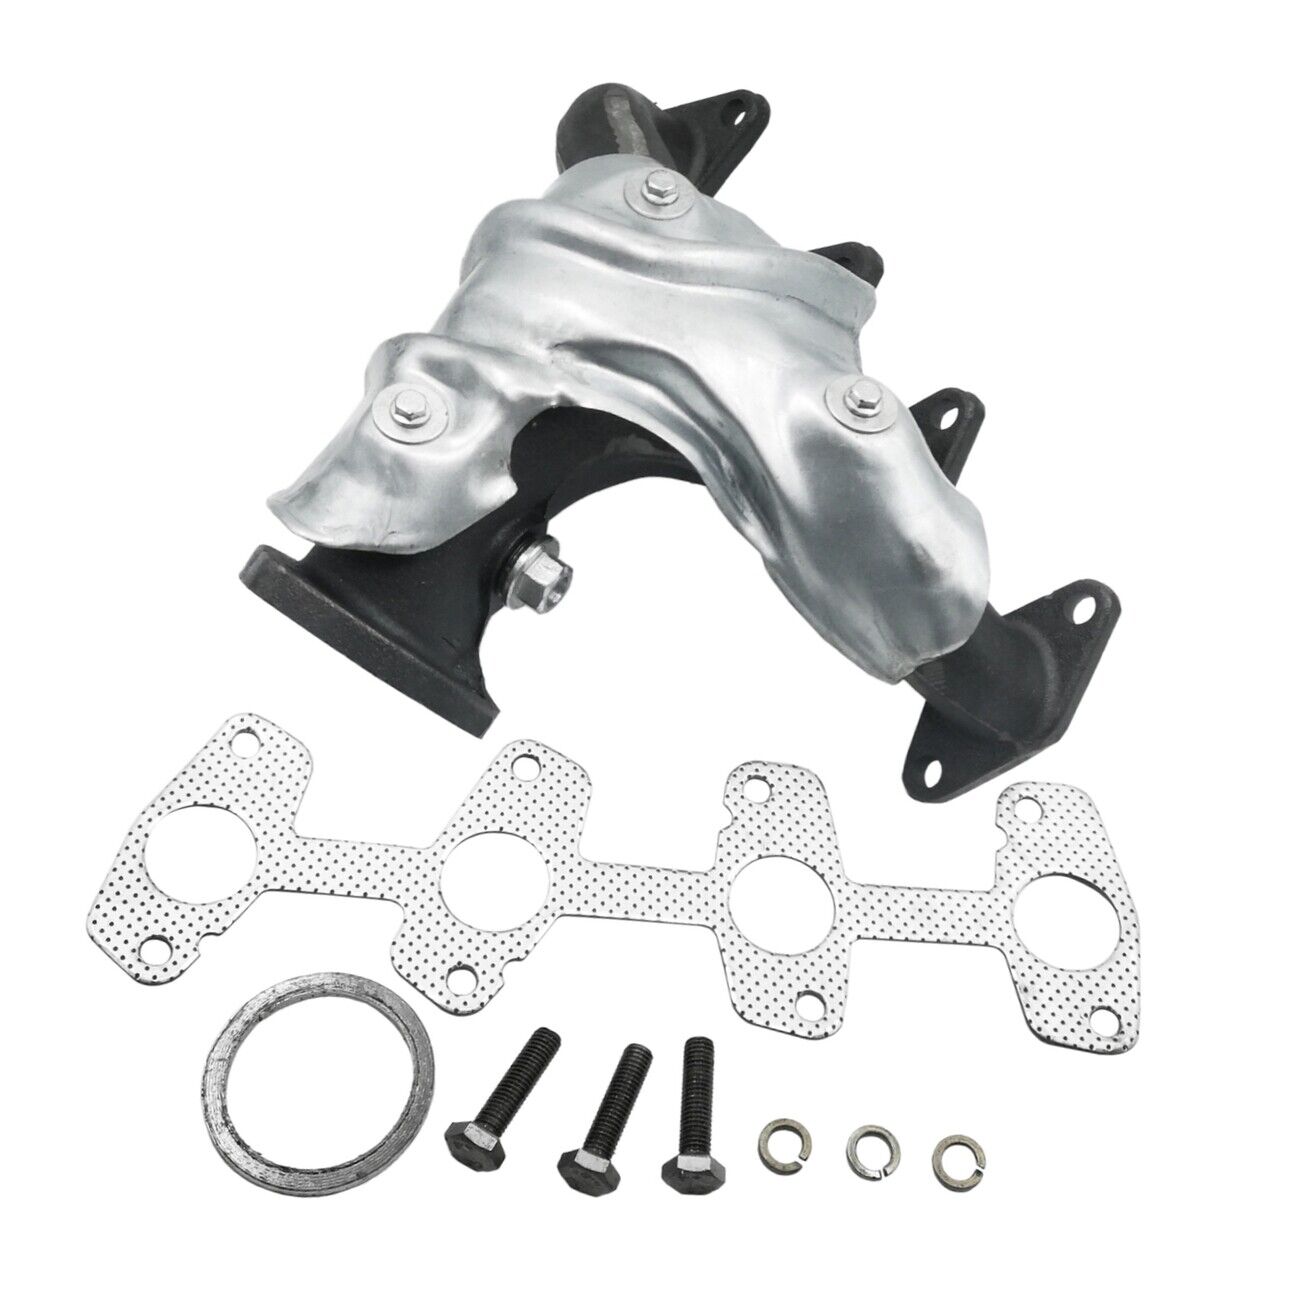 Exhaust Manifold & Gasket Kit Fits Chevy S10 Pickup GMC S-15 Sonoma L4 2.2L